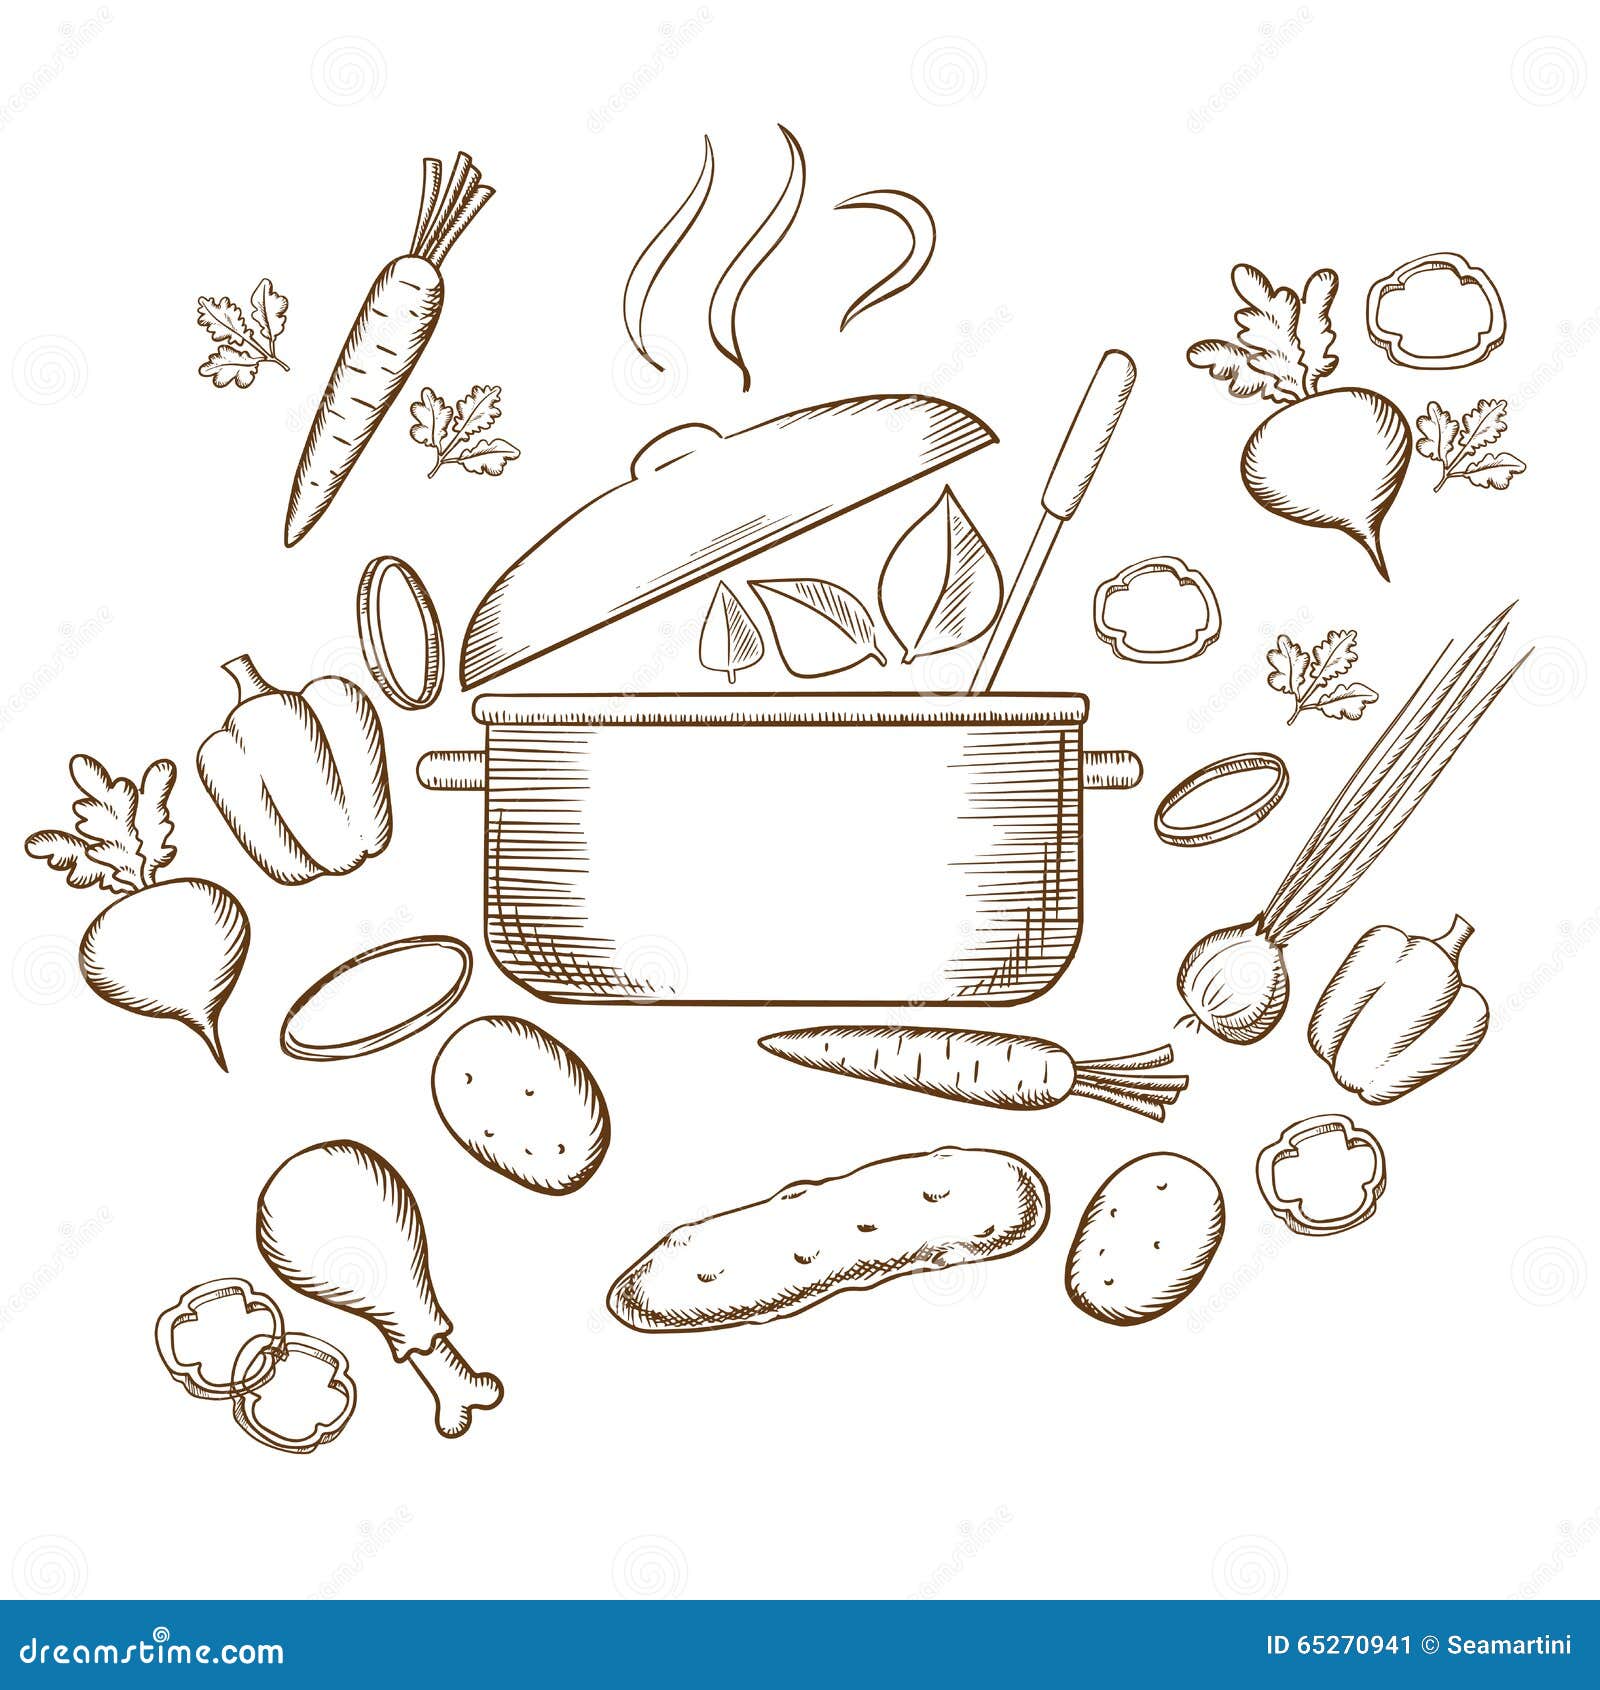 Vegetable Soup Top View Sketch Vegetable Soup  Hand Drawn Vegetable Soup  In Saucepan Vector Vegetable Soup Illustration Cut Organik Vegetable  Vegetarian And Vegan Food Stock Photo Picture And Royalty Free Image